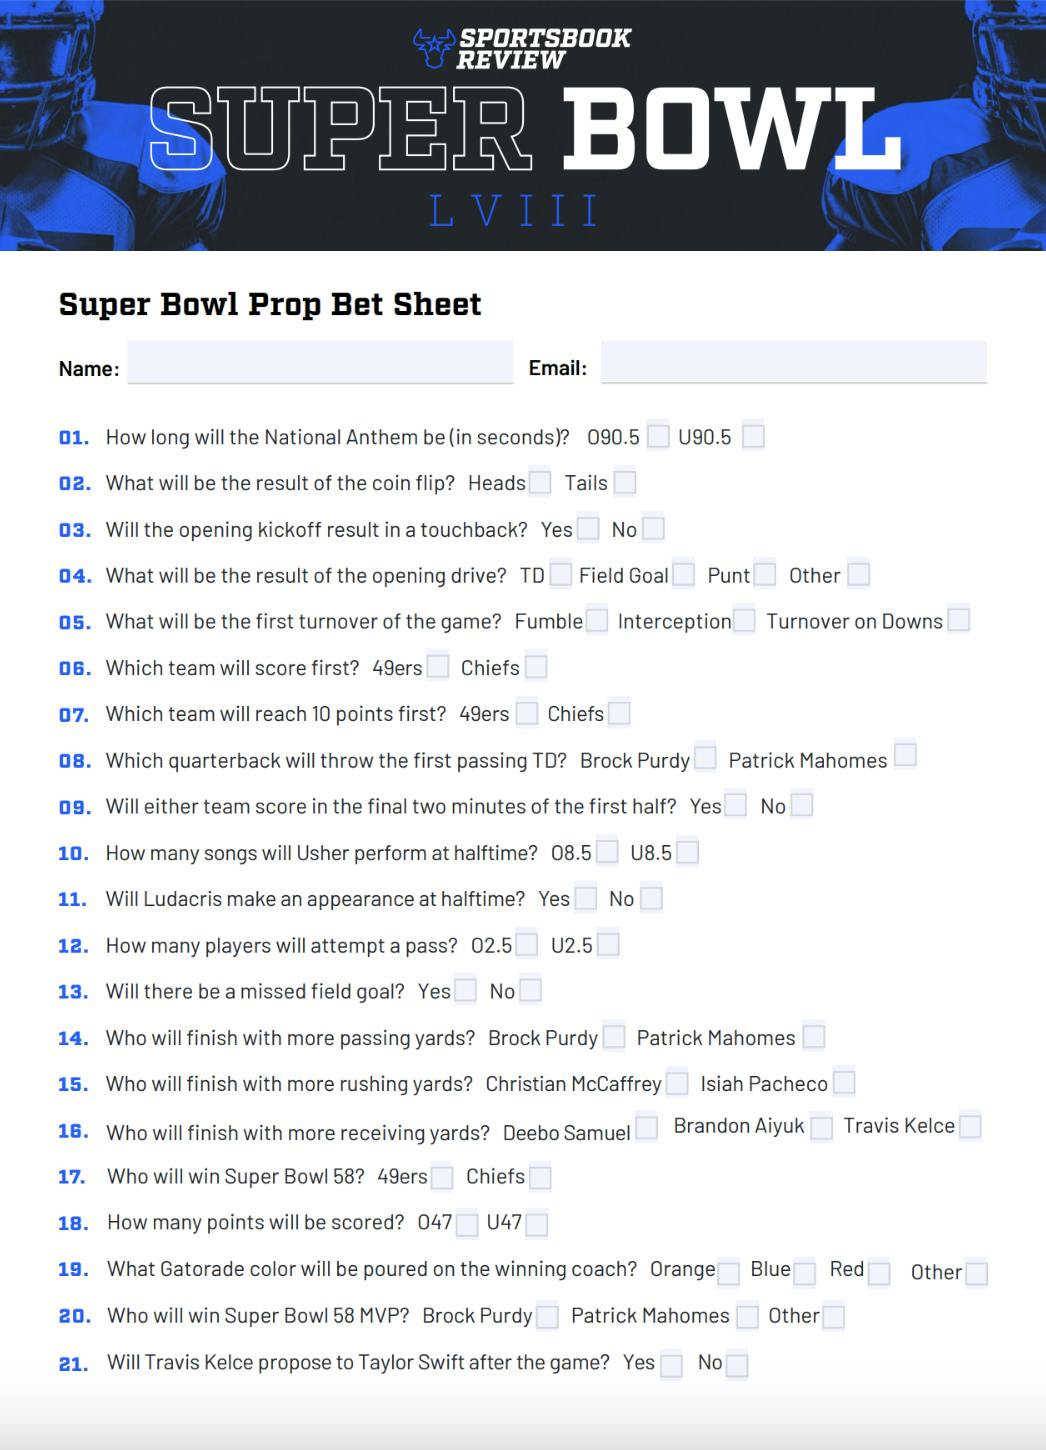 Super Bowl Prop Bet Sheet PDF Free Printable Props List for Fun Party Game